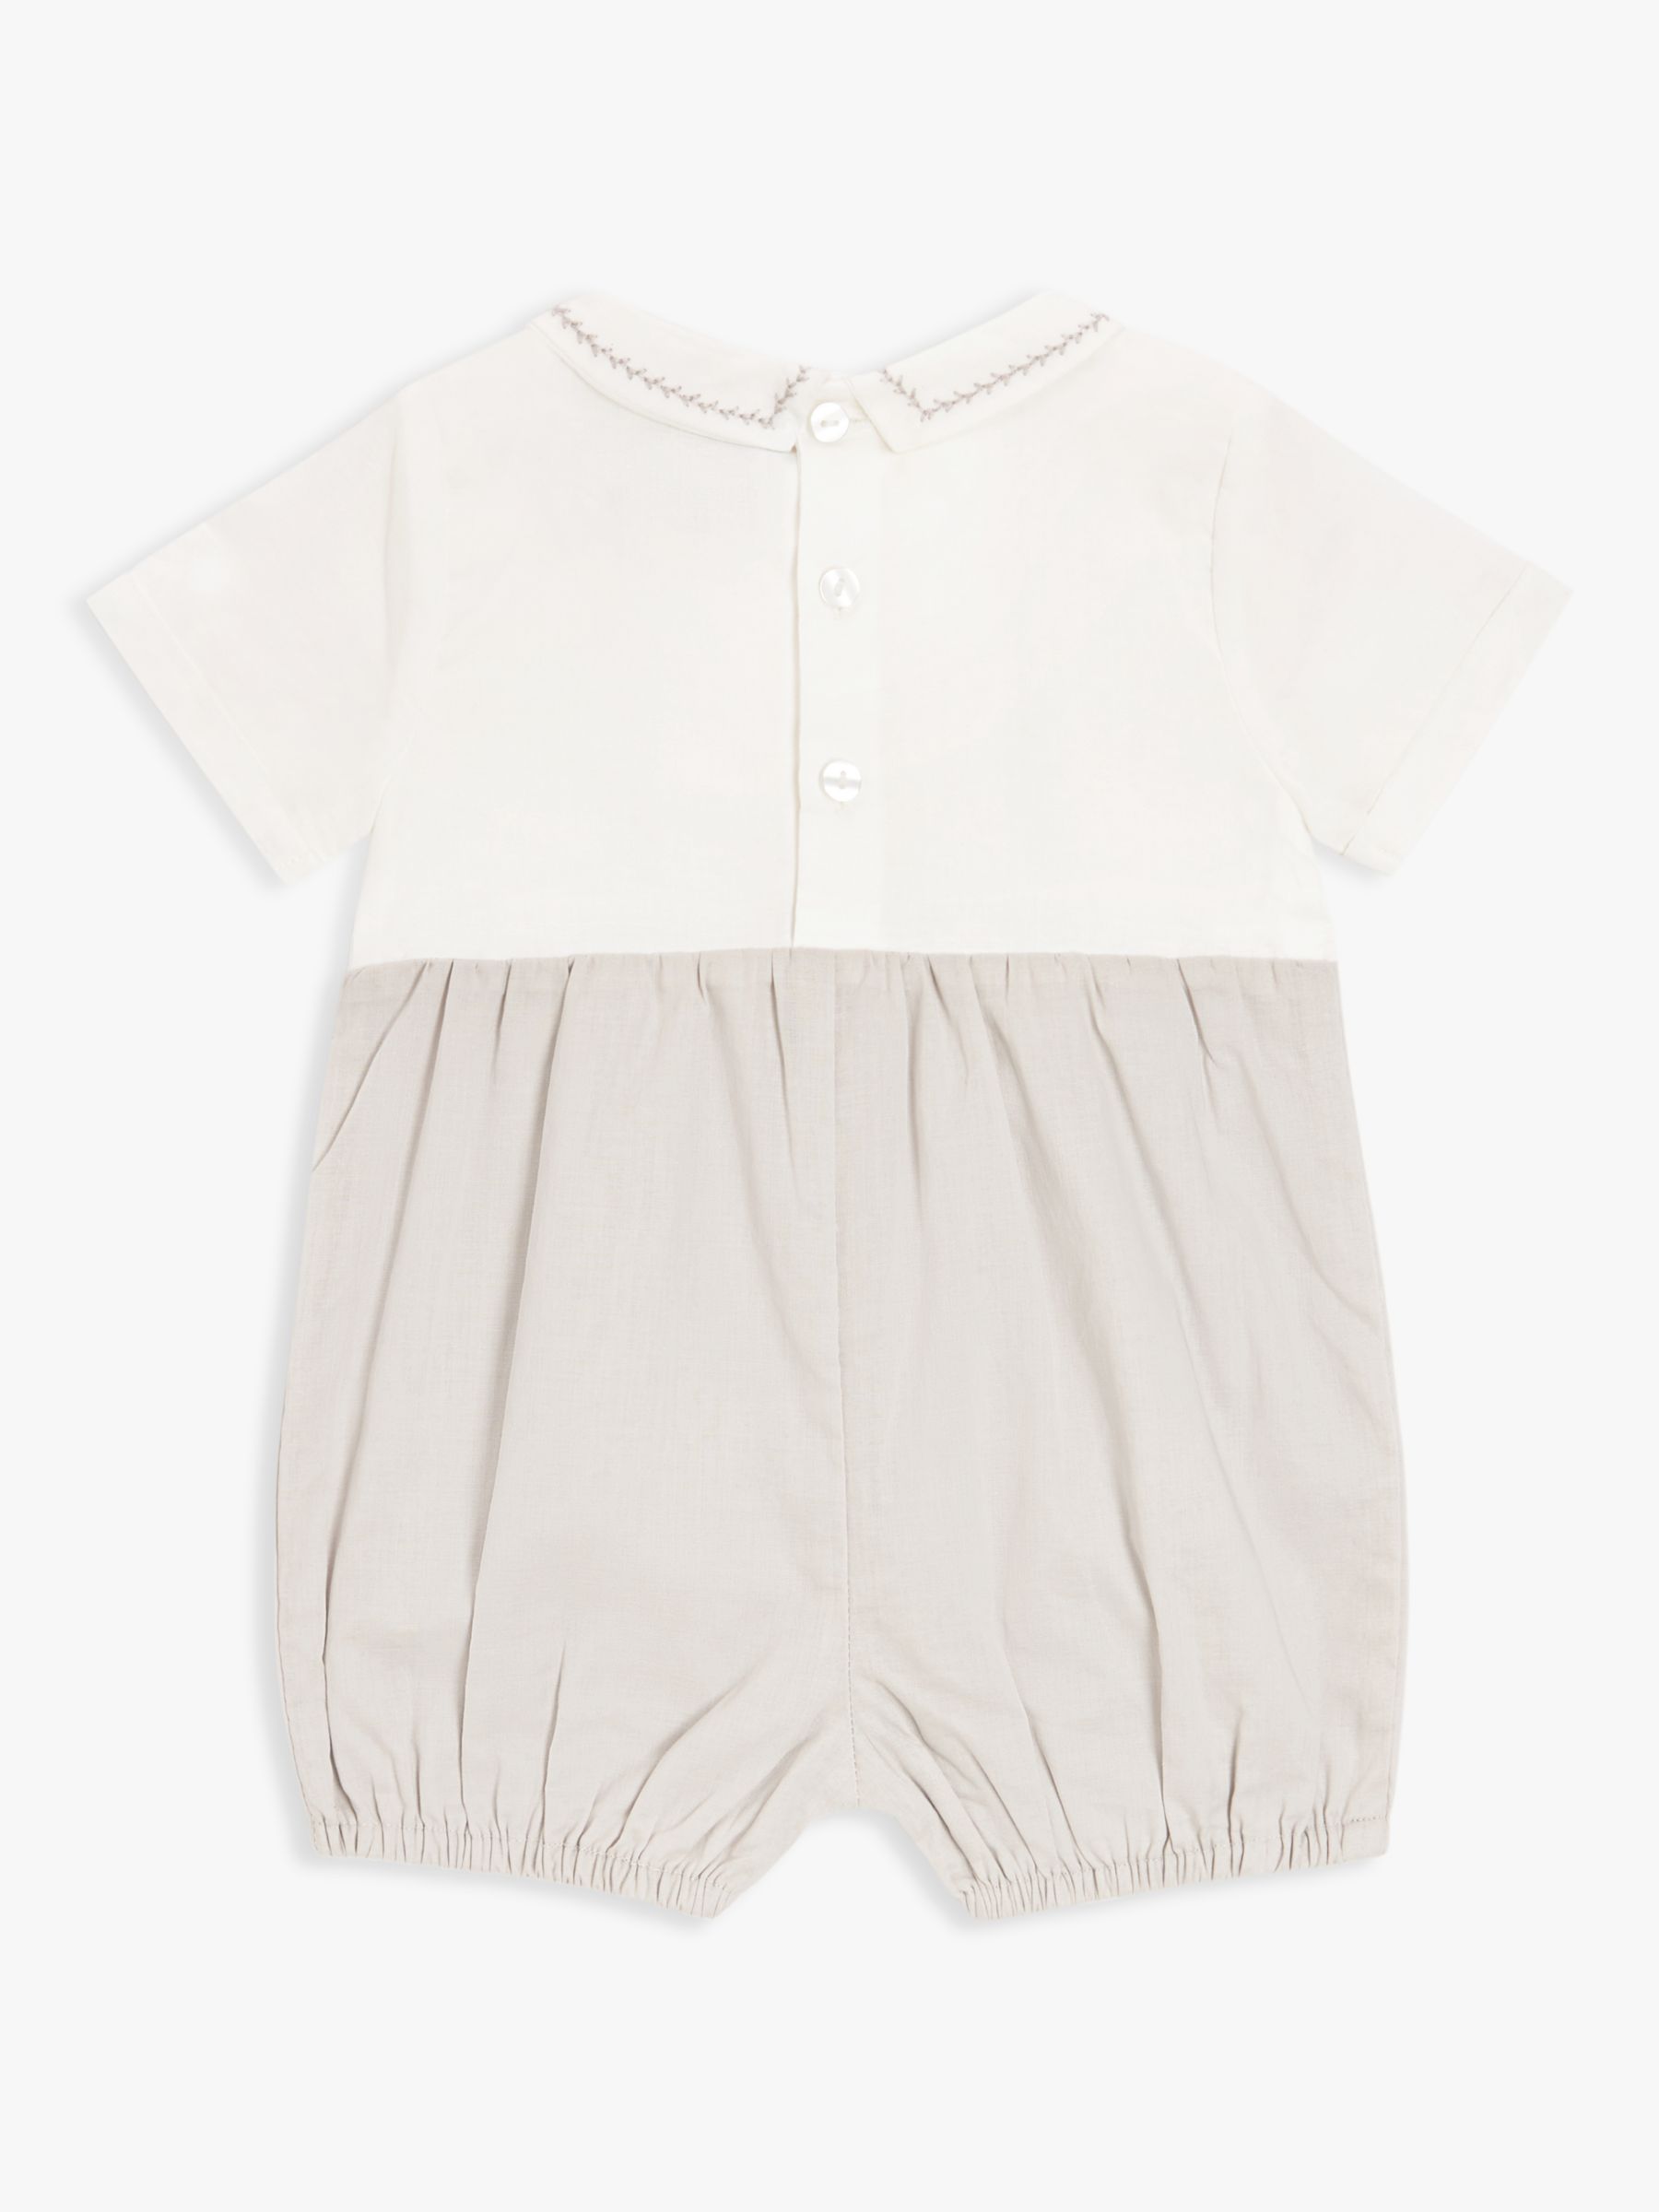 John Lewis Heirloom Collection Baby Linen Romper, White at John Lewis ...